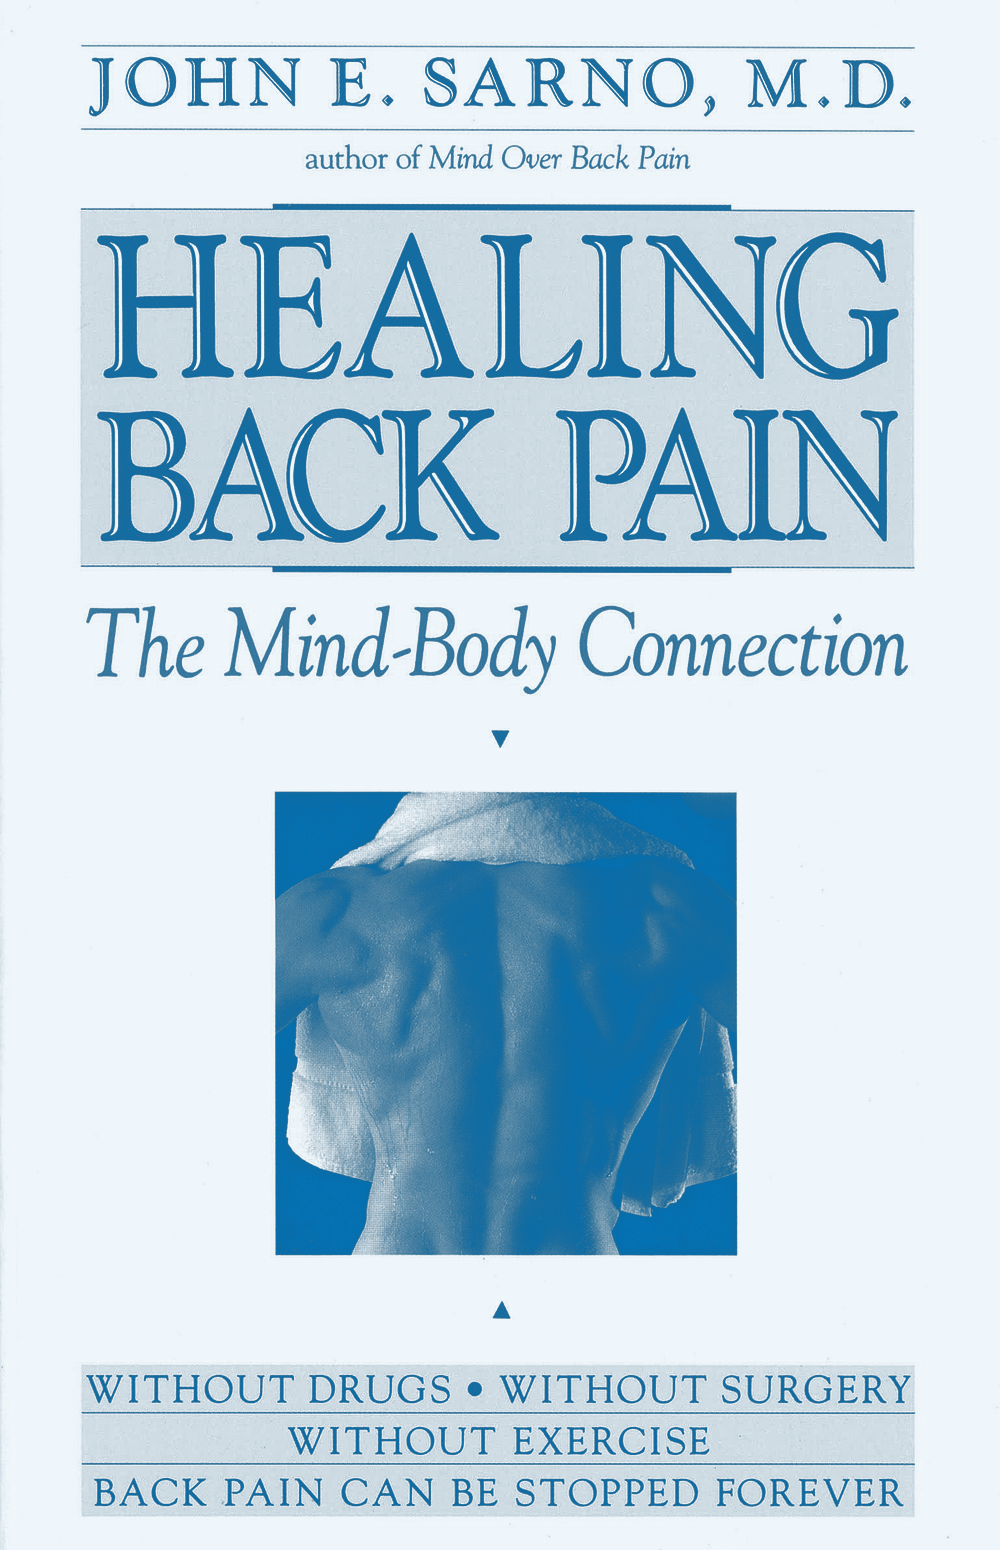 Cover of the book Healing Back Pain by Dr. John Sarno.